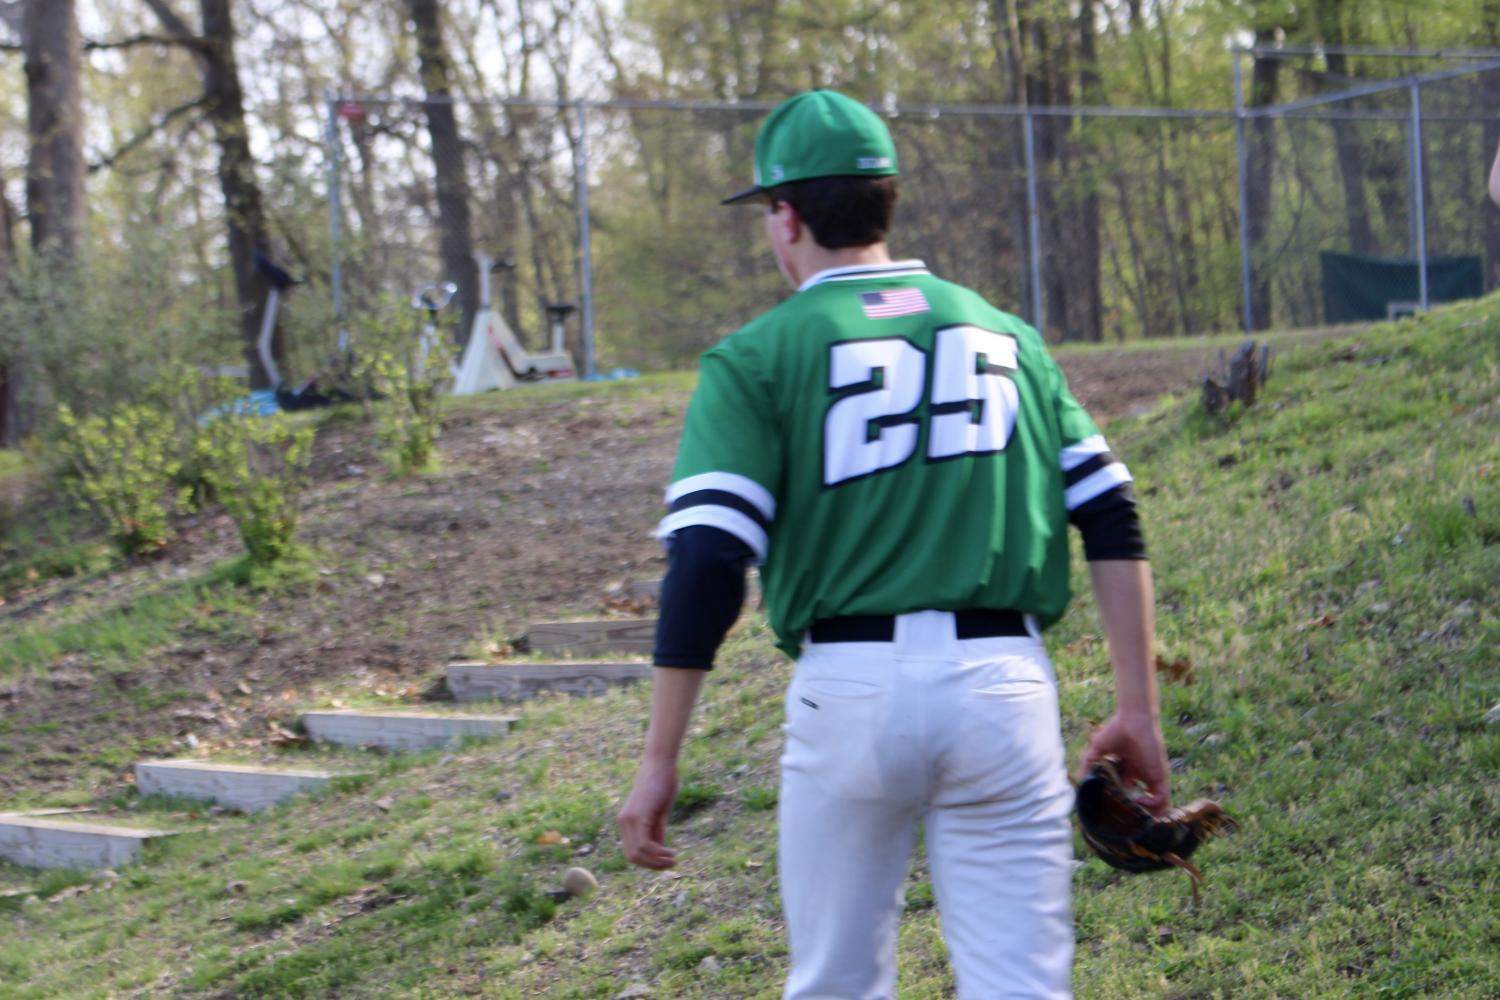 Pascack Valley starting pitcher Riley Weis before a game. Weis threw 6 innings and got the no-decision in PVs 3-2 extra inning loss to Cranford in the Group 3 semifinals.